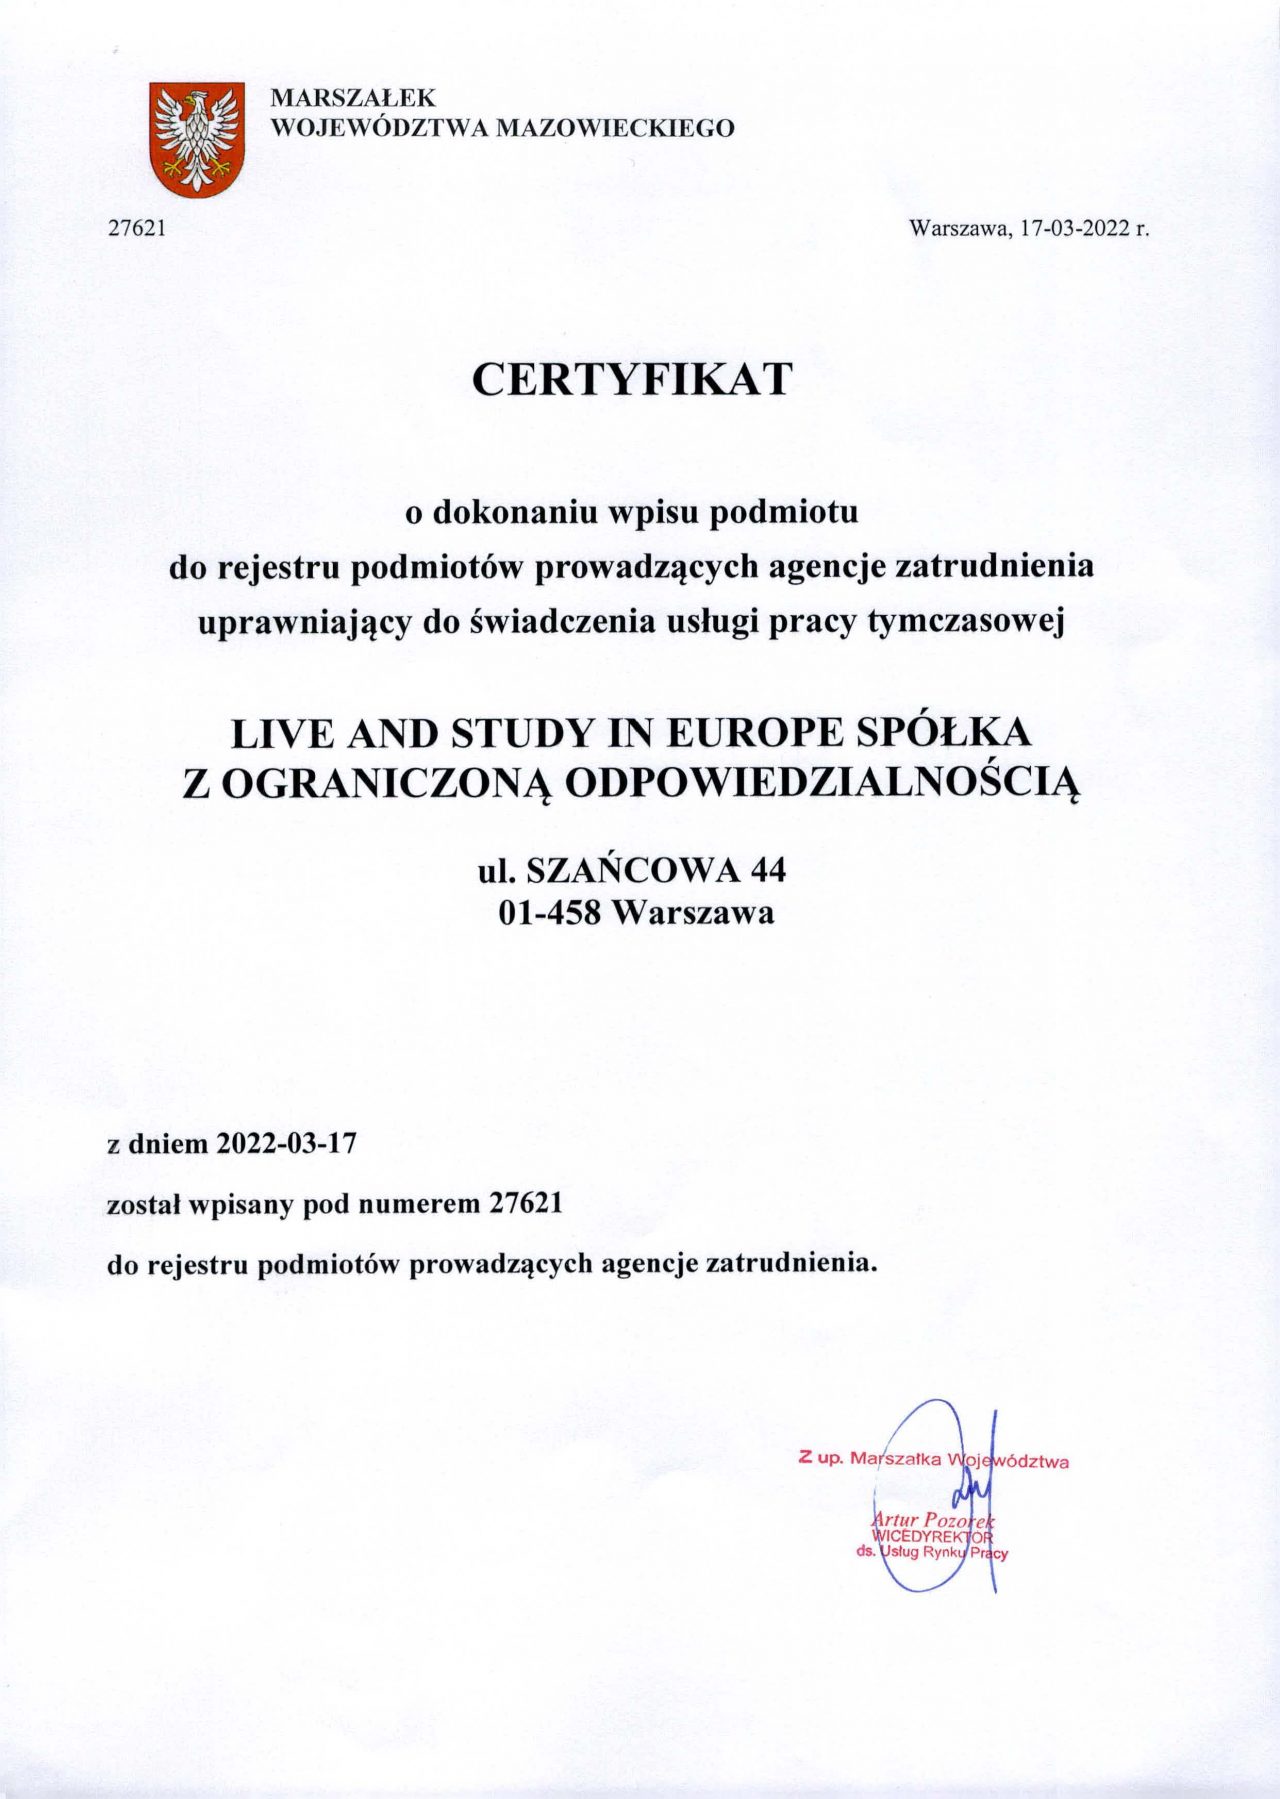 live and study certificate